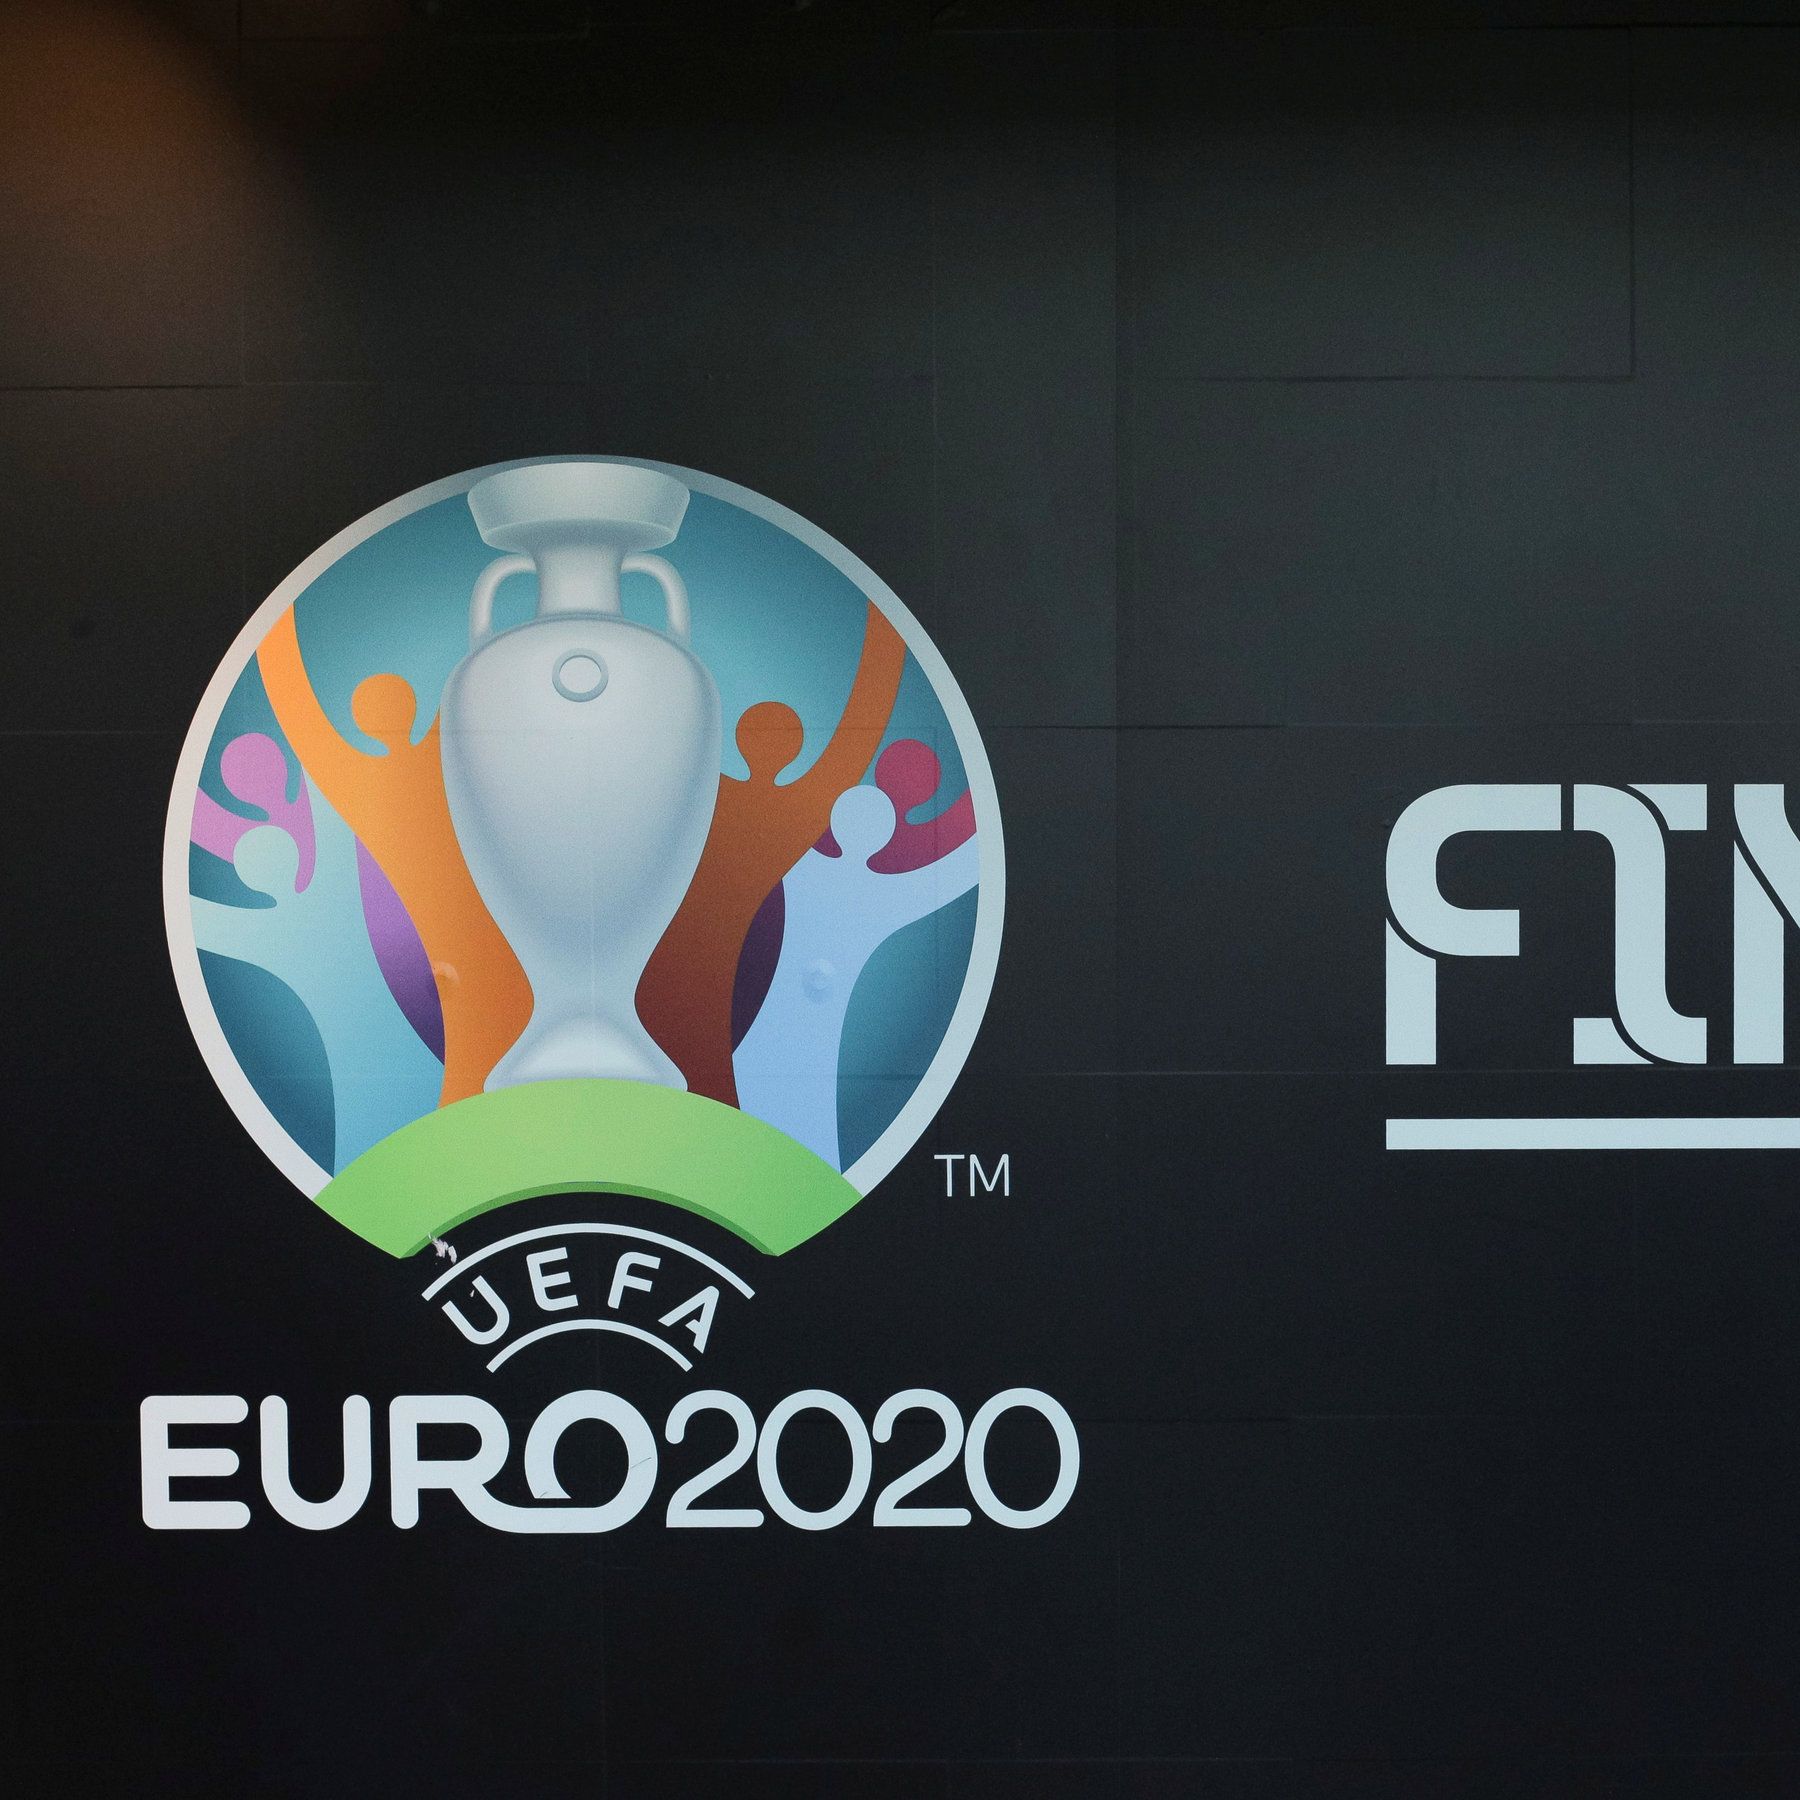 Euro 2020 and Copa América Are Postponed for a Year